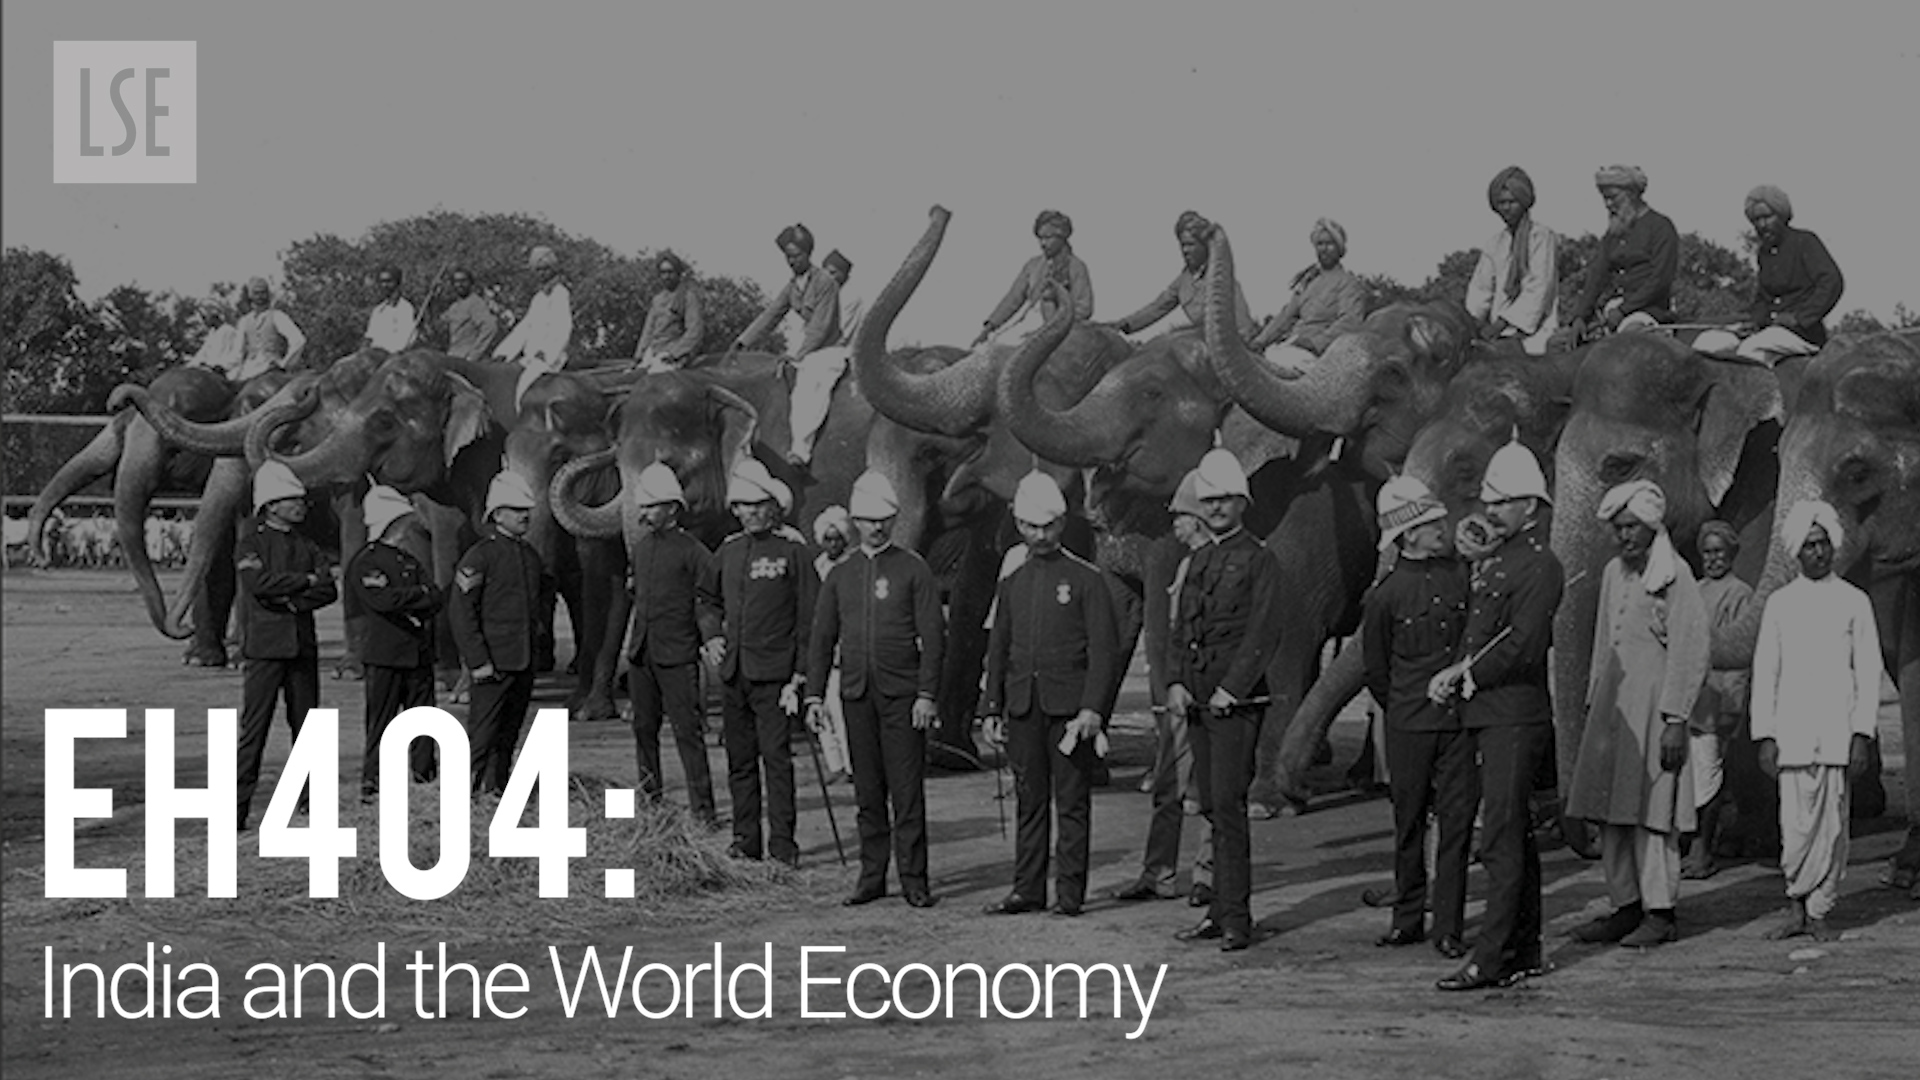 EH404 India and the World Economy